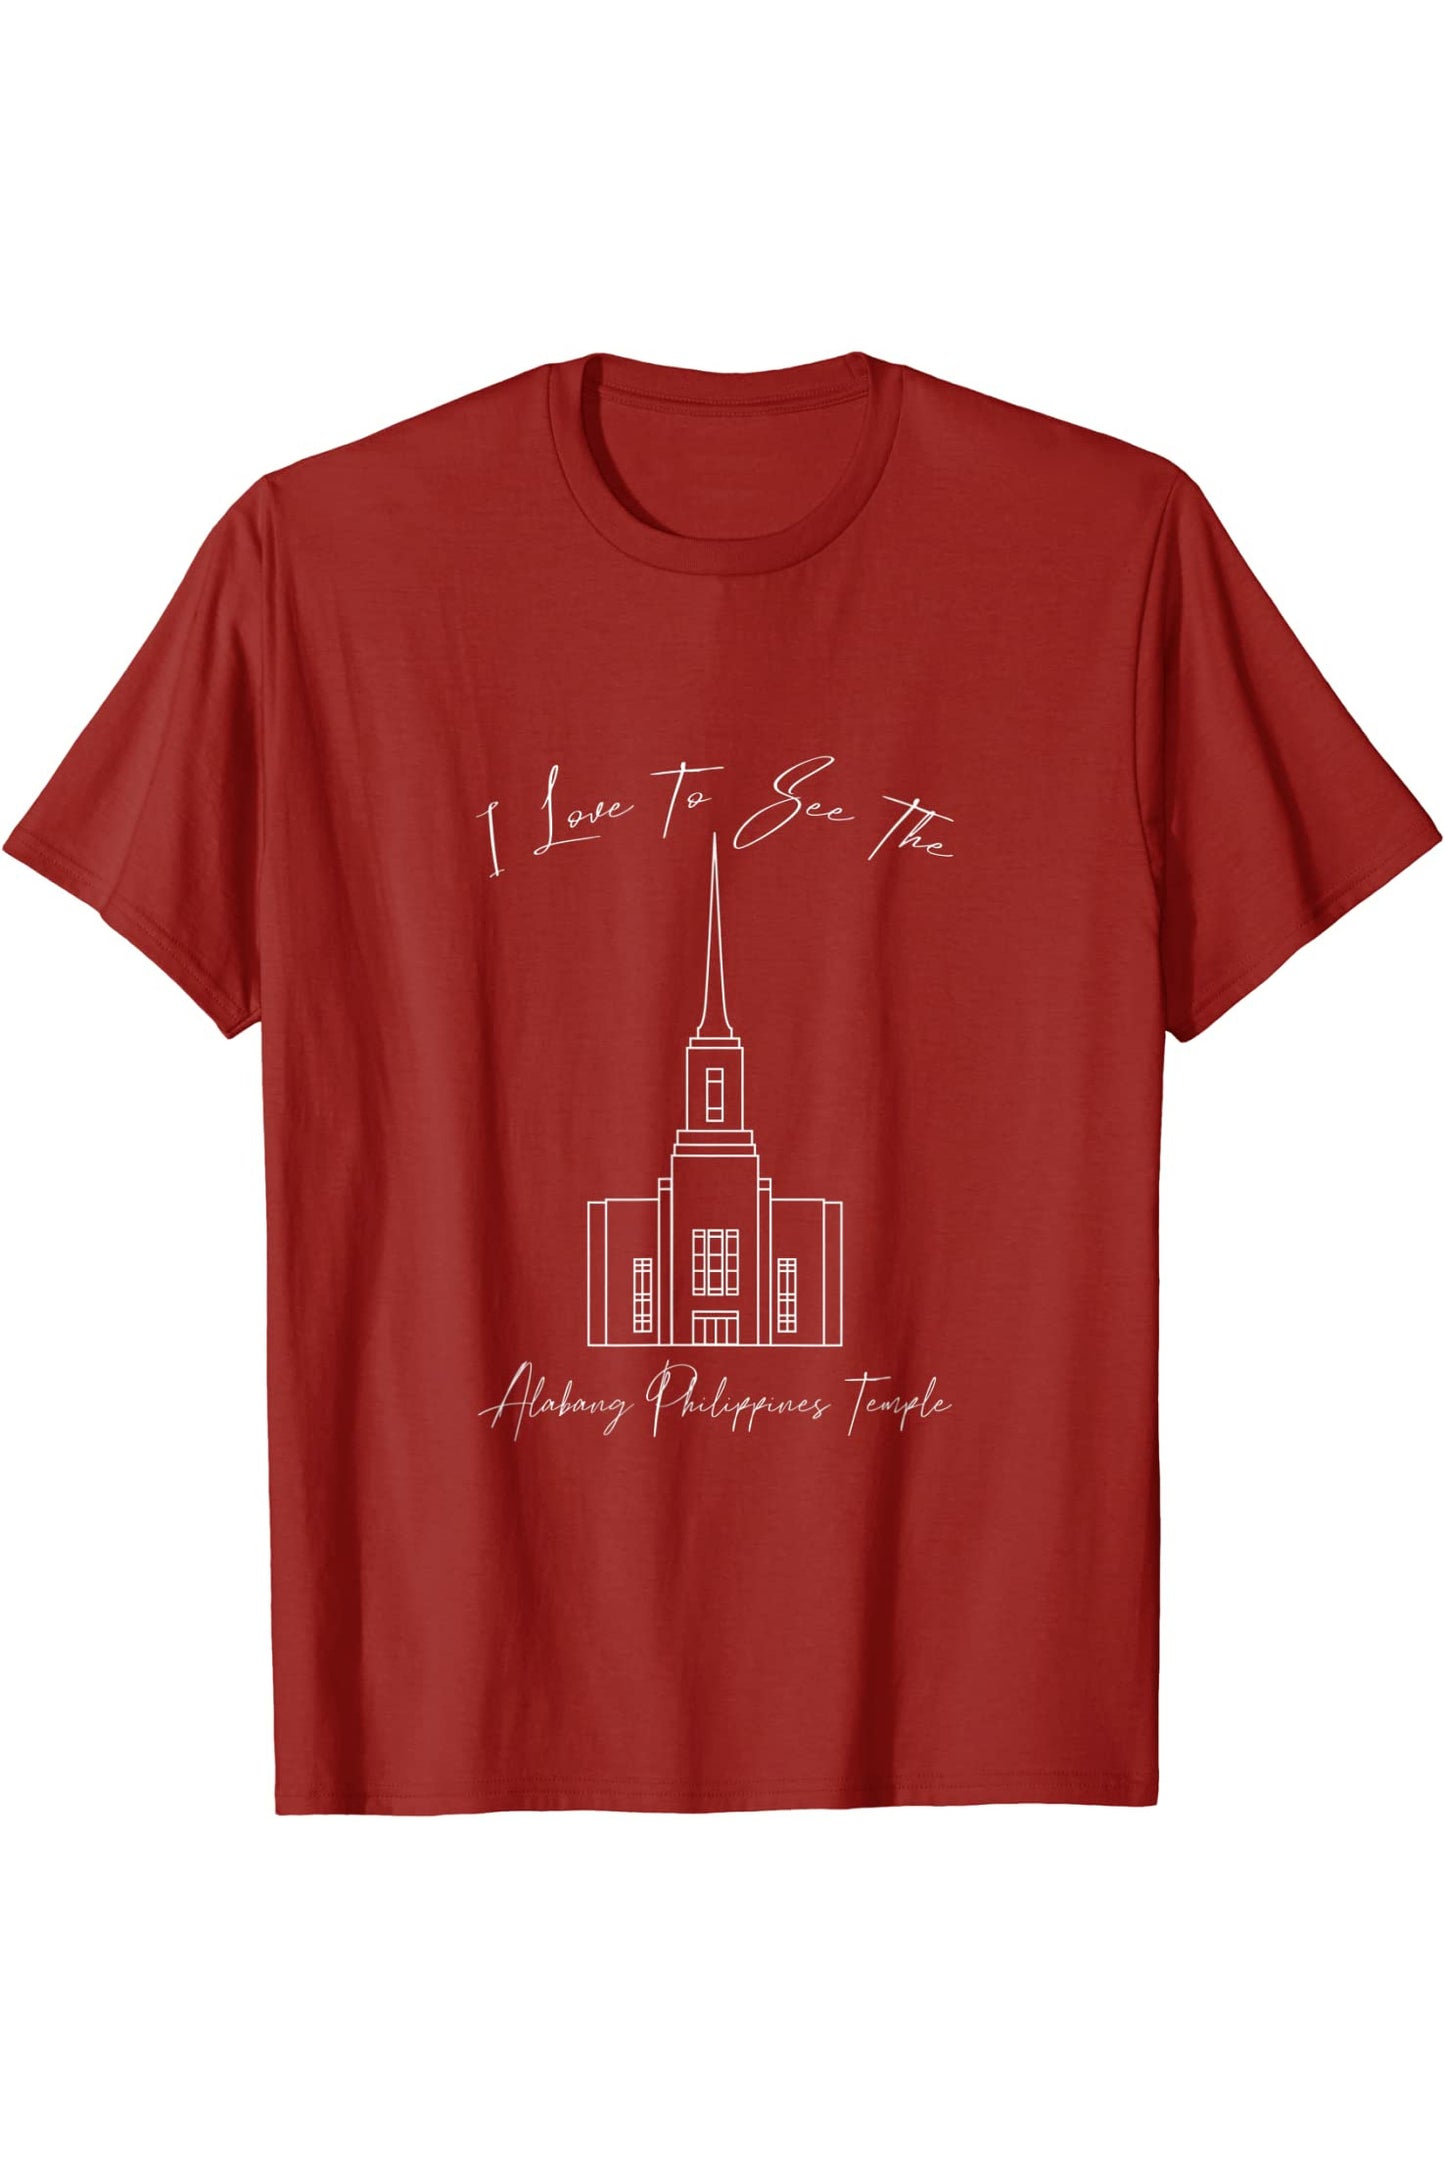 Alabang Philippines Temple T-Shirt - Calligraphy Style (English) US